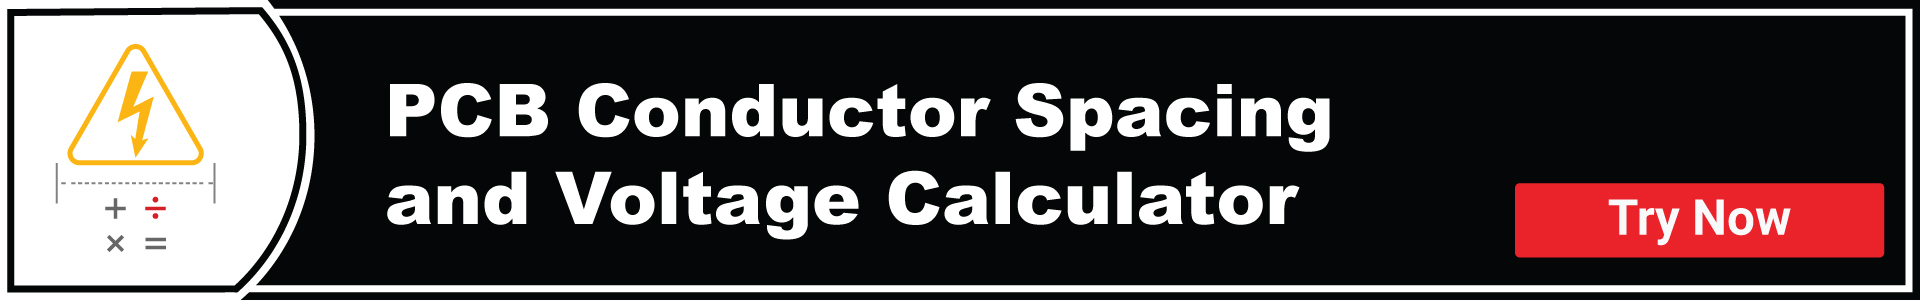 pcb-conductor-spacing-and-voltage-calculator.jpg